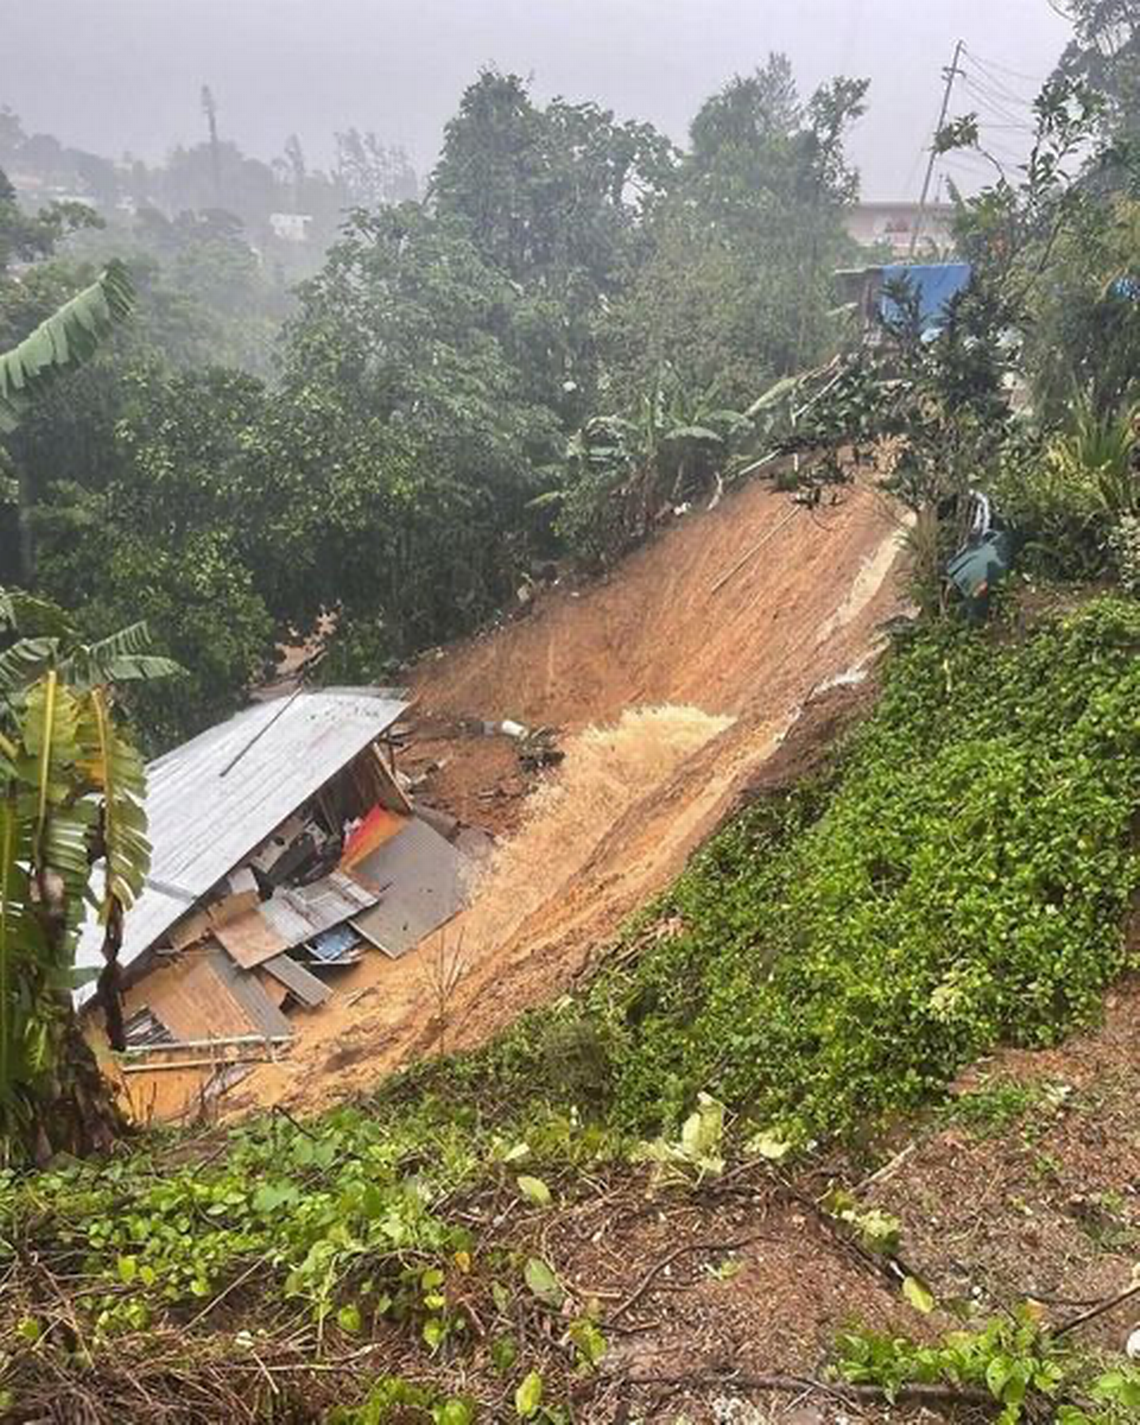 A landslide caused a house to collapse in the Puerto Rican town of Barranquitas on Sunday, Sept. 18, 2022.